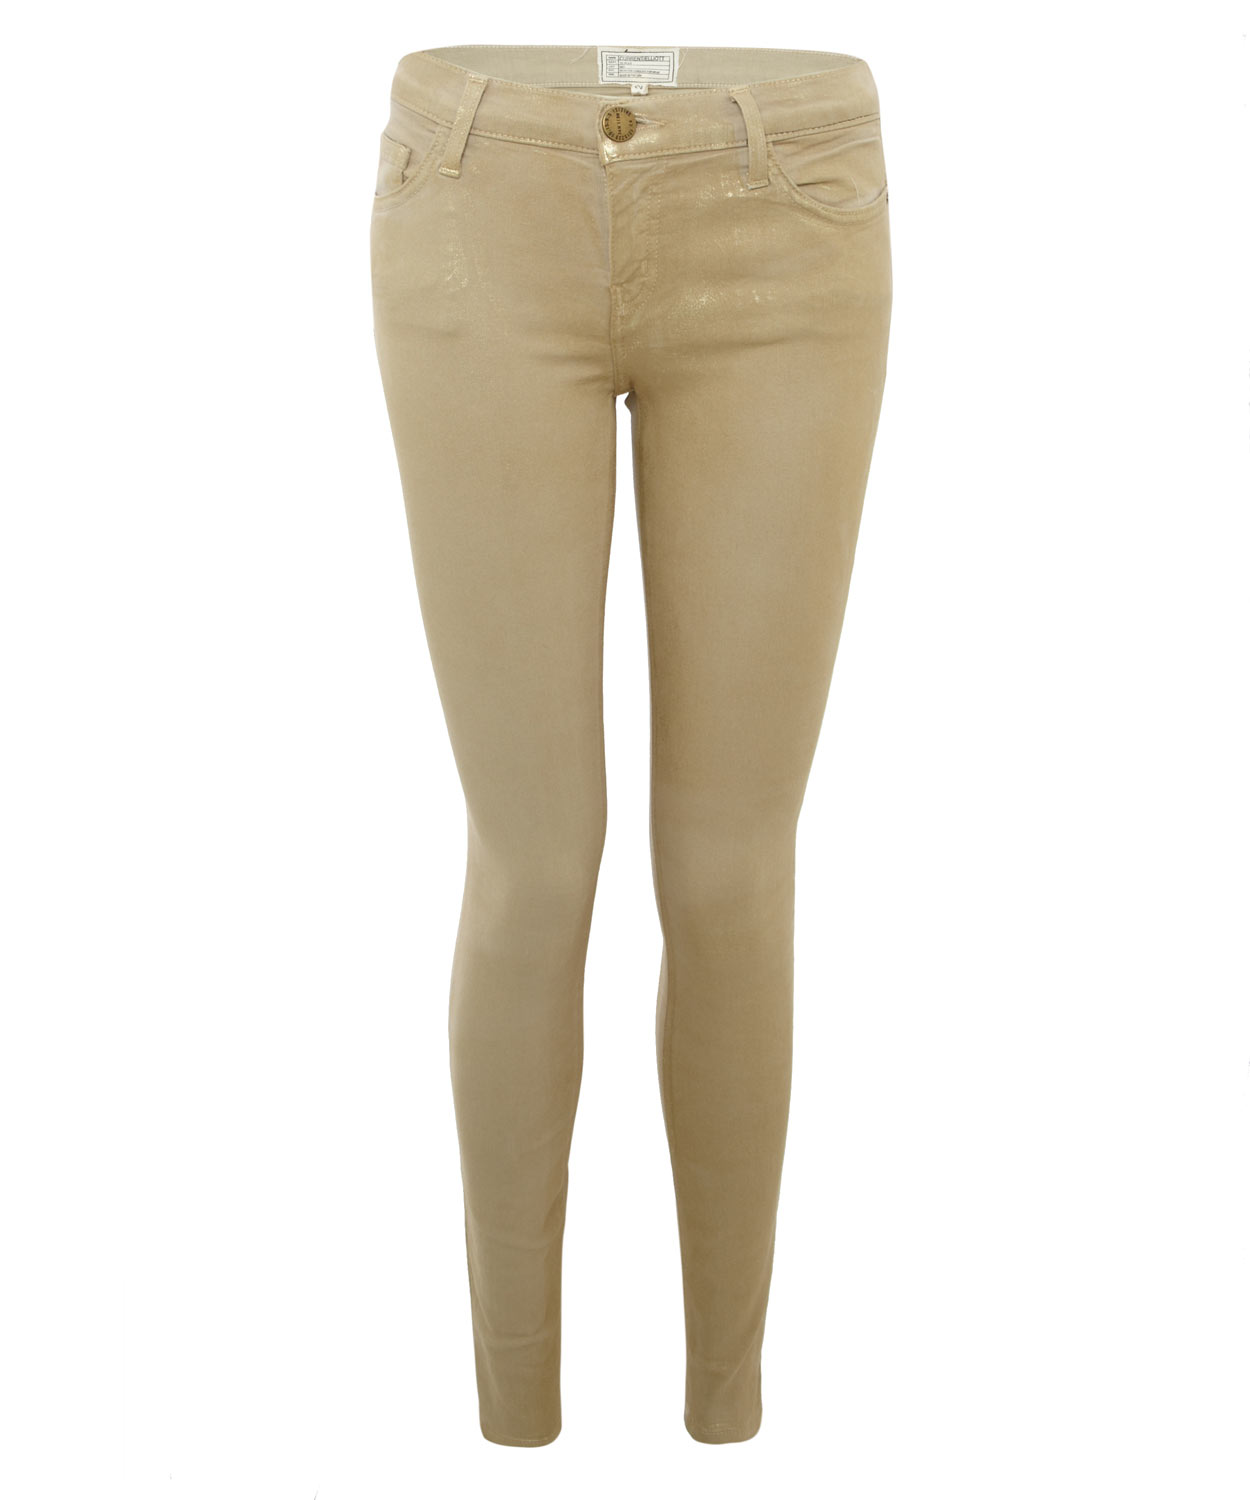 Lyst - Current/Elliott The Ankle Skinny Gold Metallic Jeans in Natural